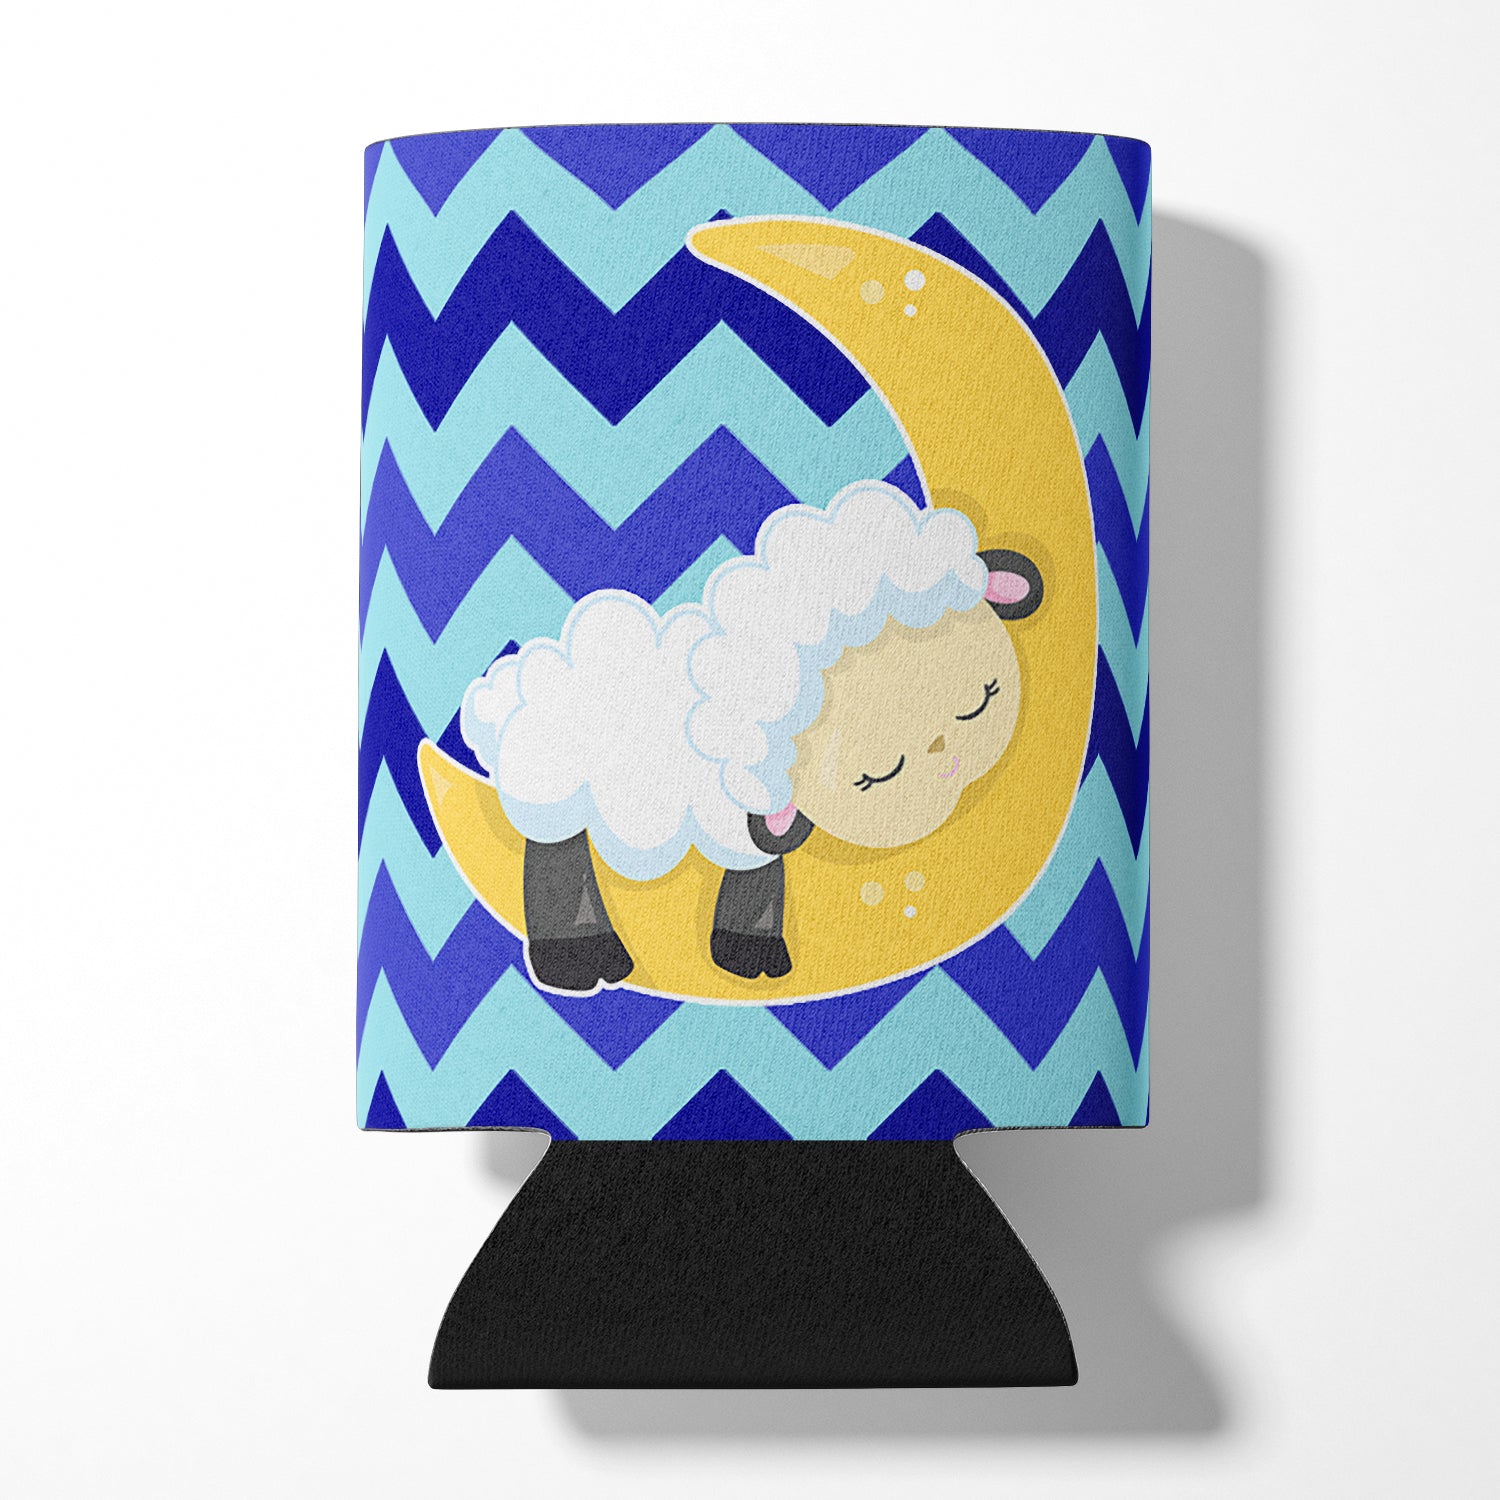 Sheep on Moon Chevron Can or Bottle Hugger BB6877CC  the-store.com.